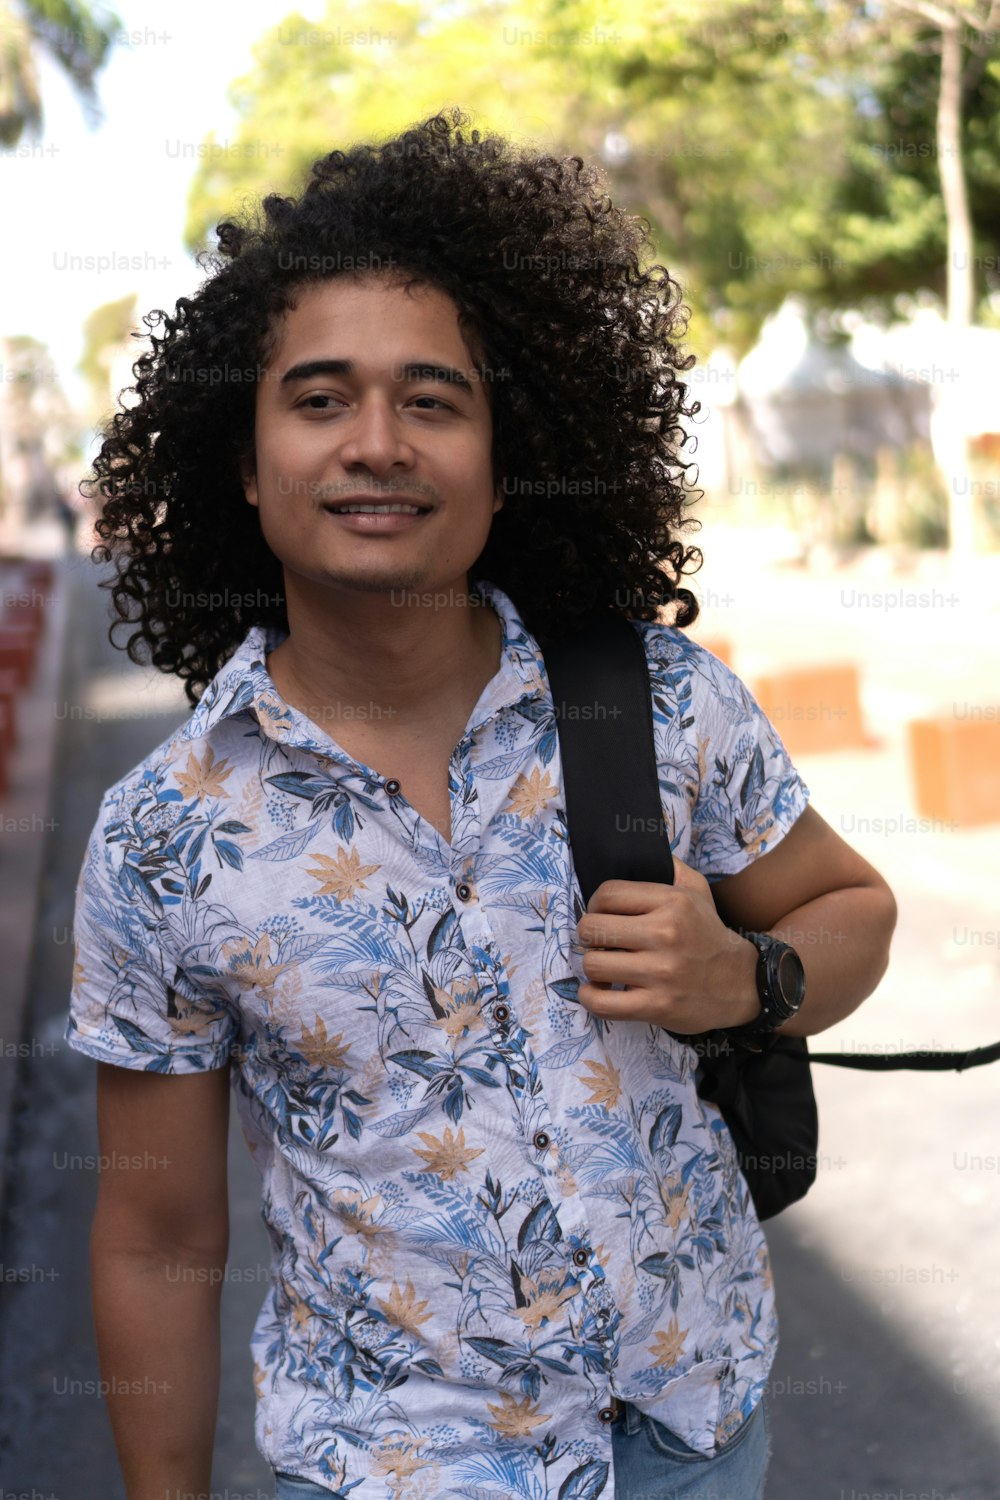 Man with afro hair, wearing a backpack, walking down the street